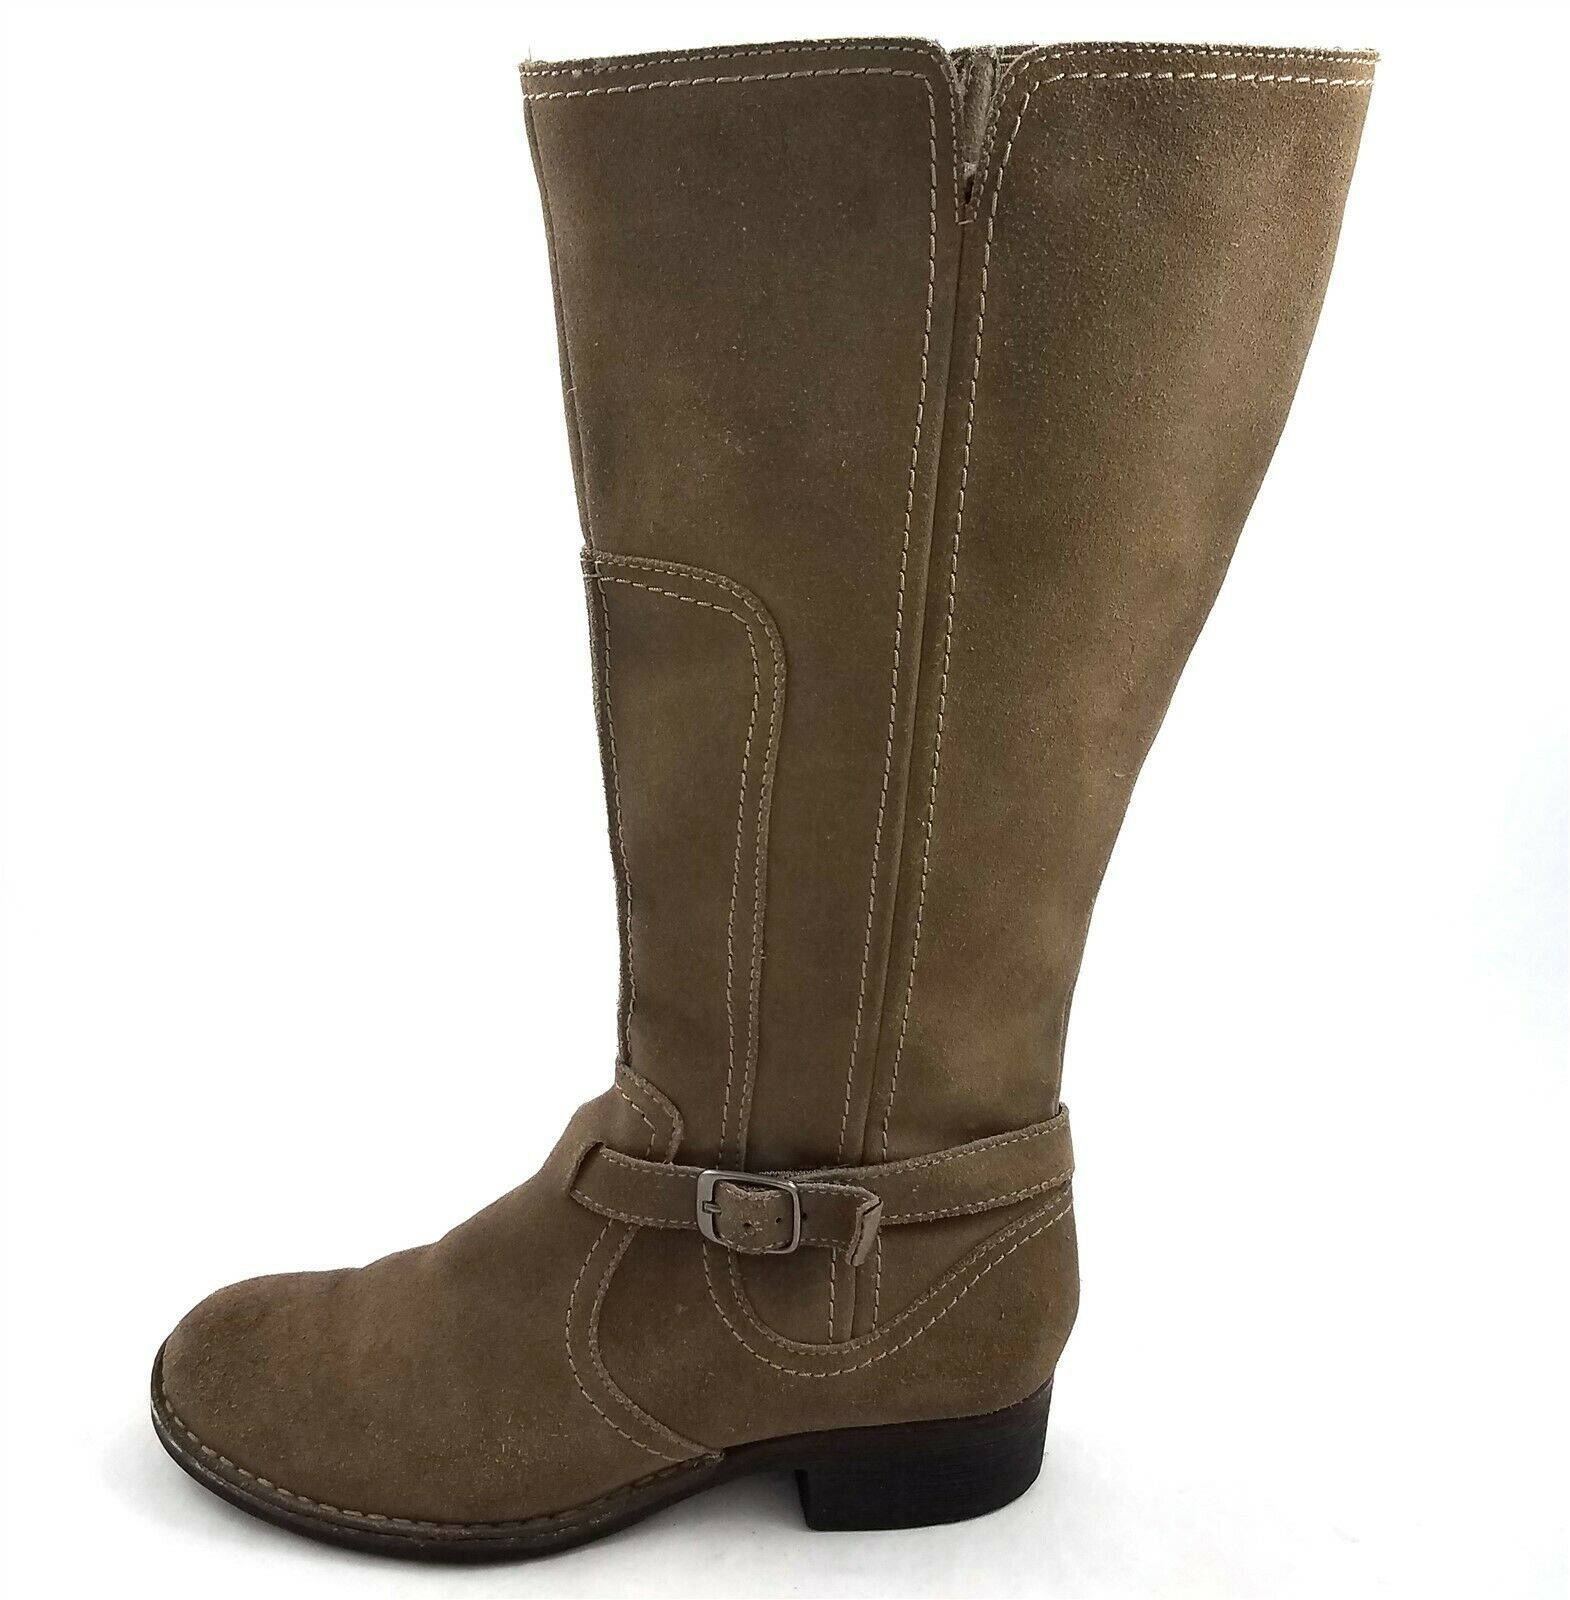 clarks boots with zipper